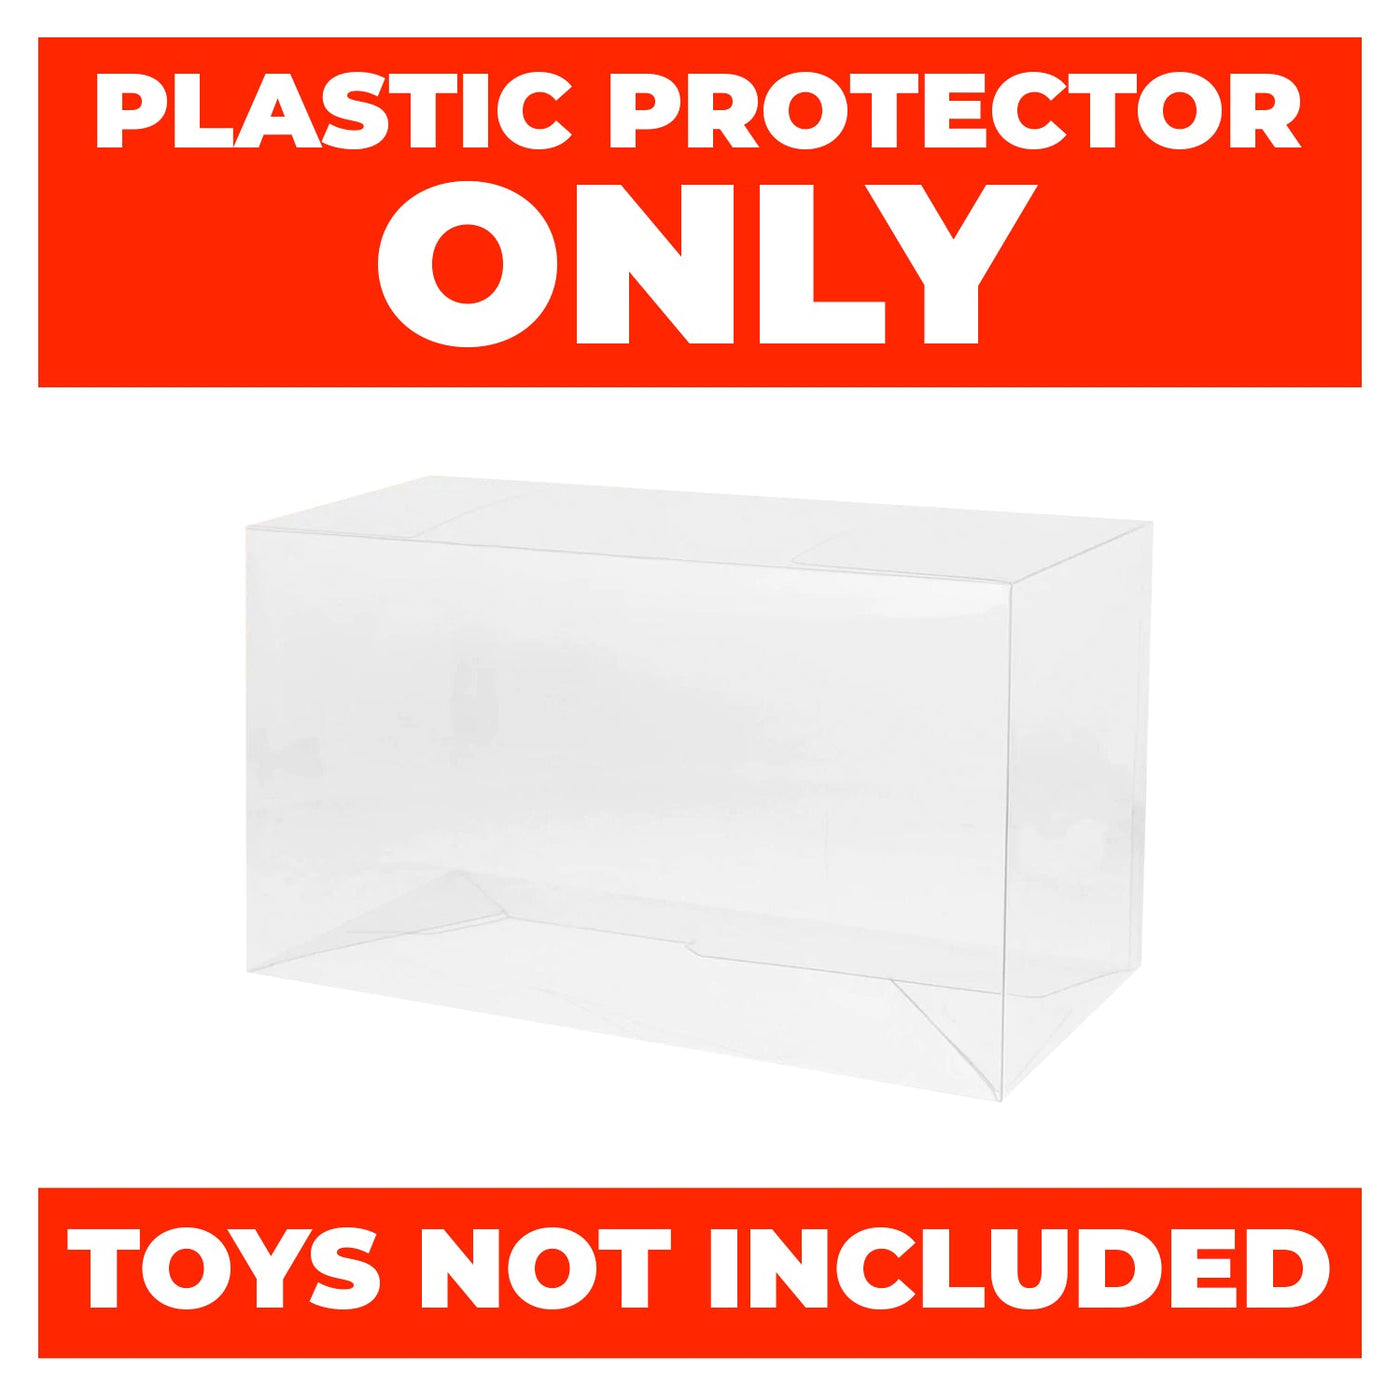 pop vhs game covers best funko pop protectors thick strong uv scratch flat top stack vinyl display geek plastic shield vaulted eco armor fits collect protect display case kollector protector